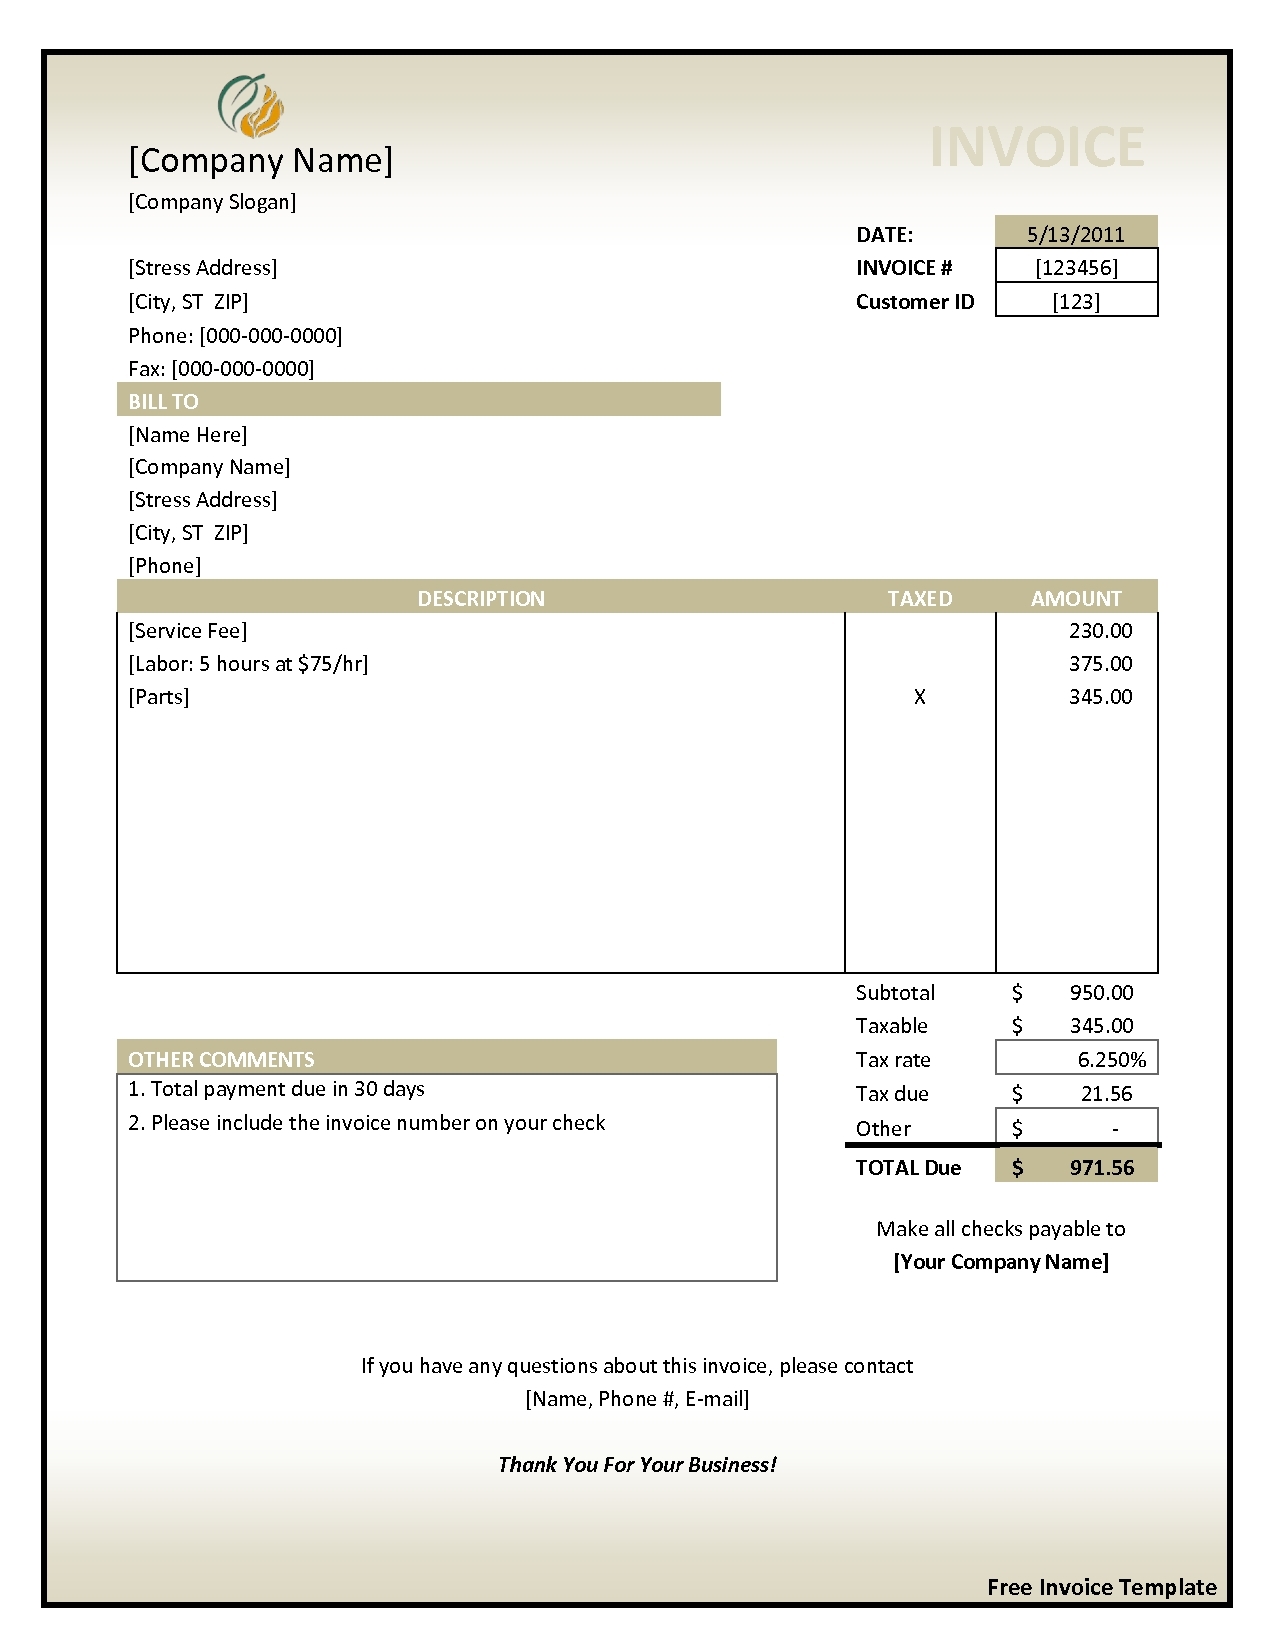 download sample invoice invoice template free 2016 invoice template to download